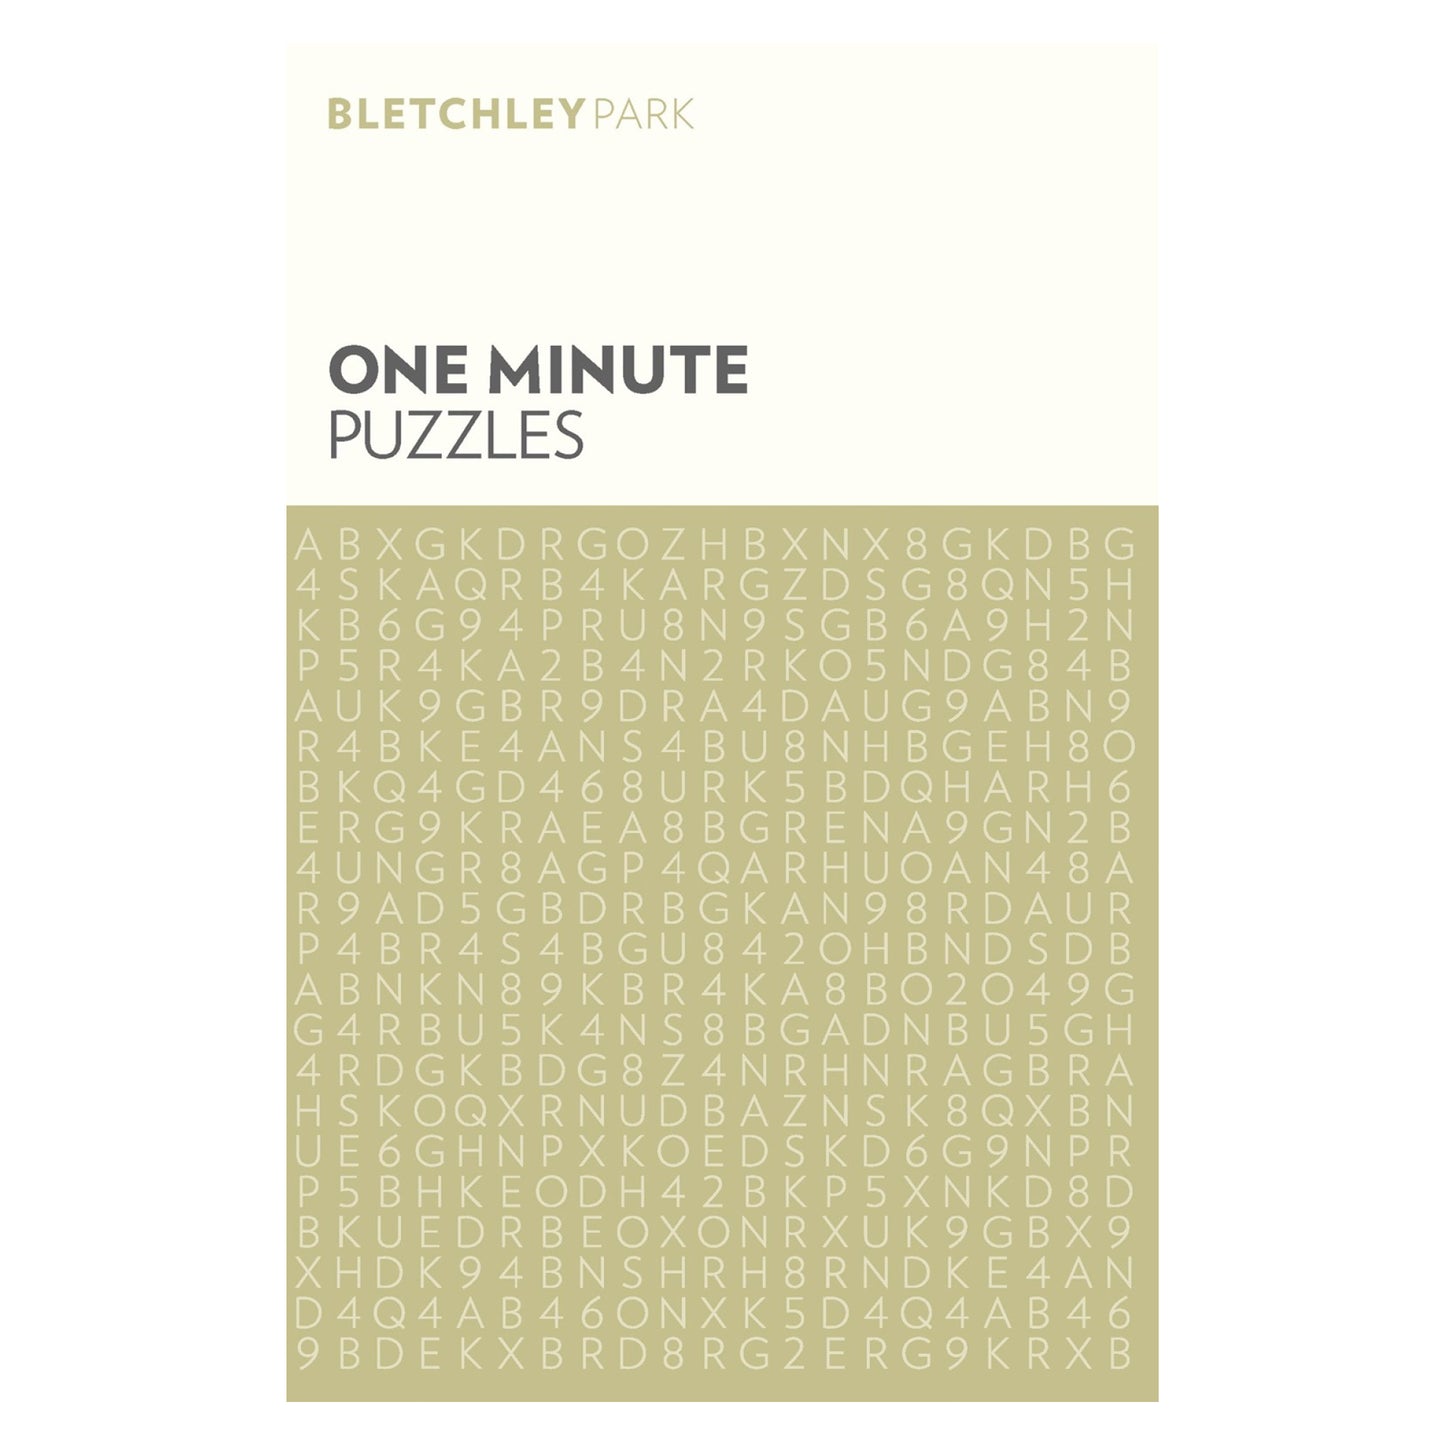 Bletchley Park: One Minute Puzzles